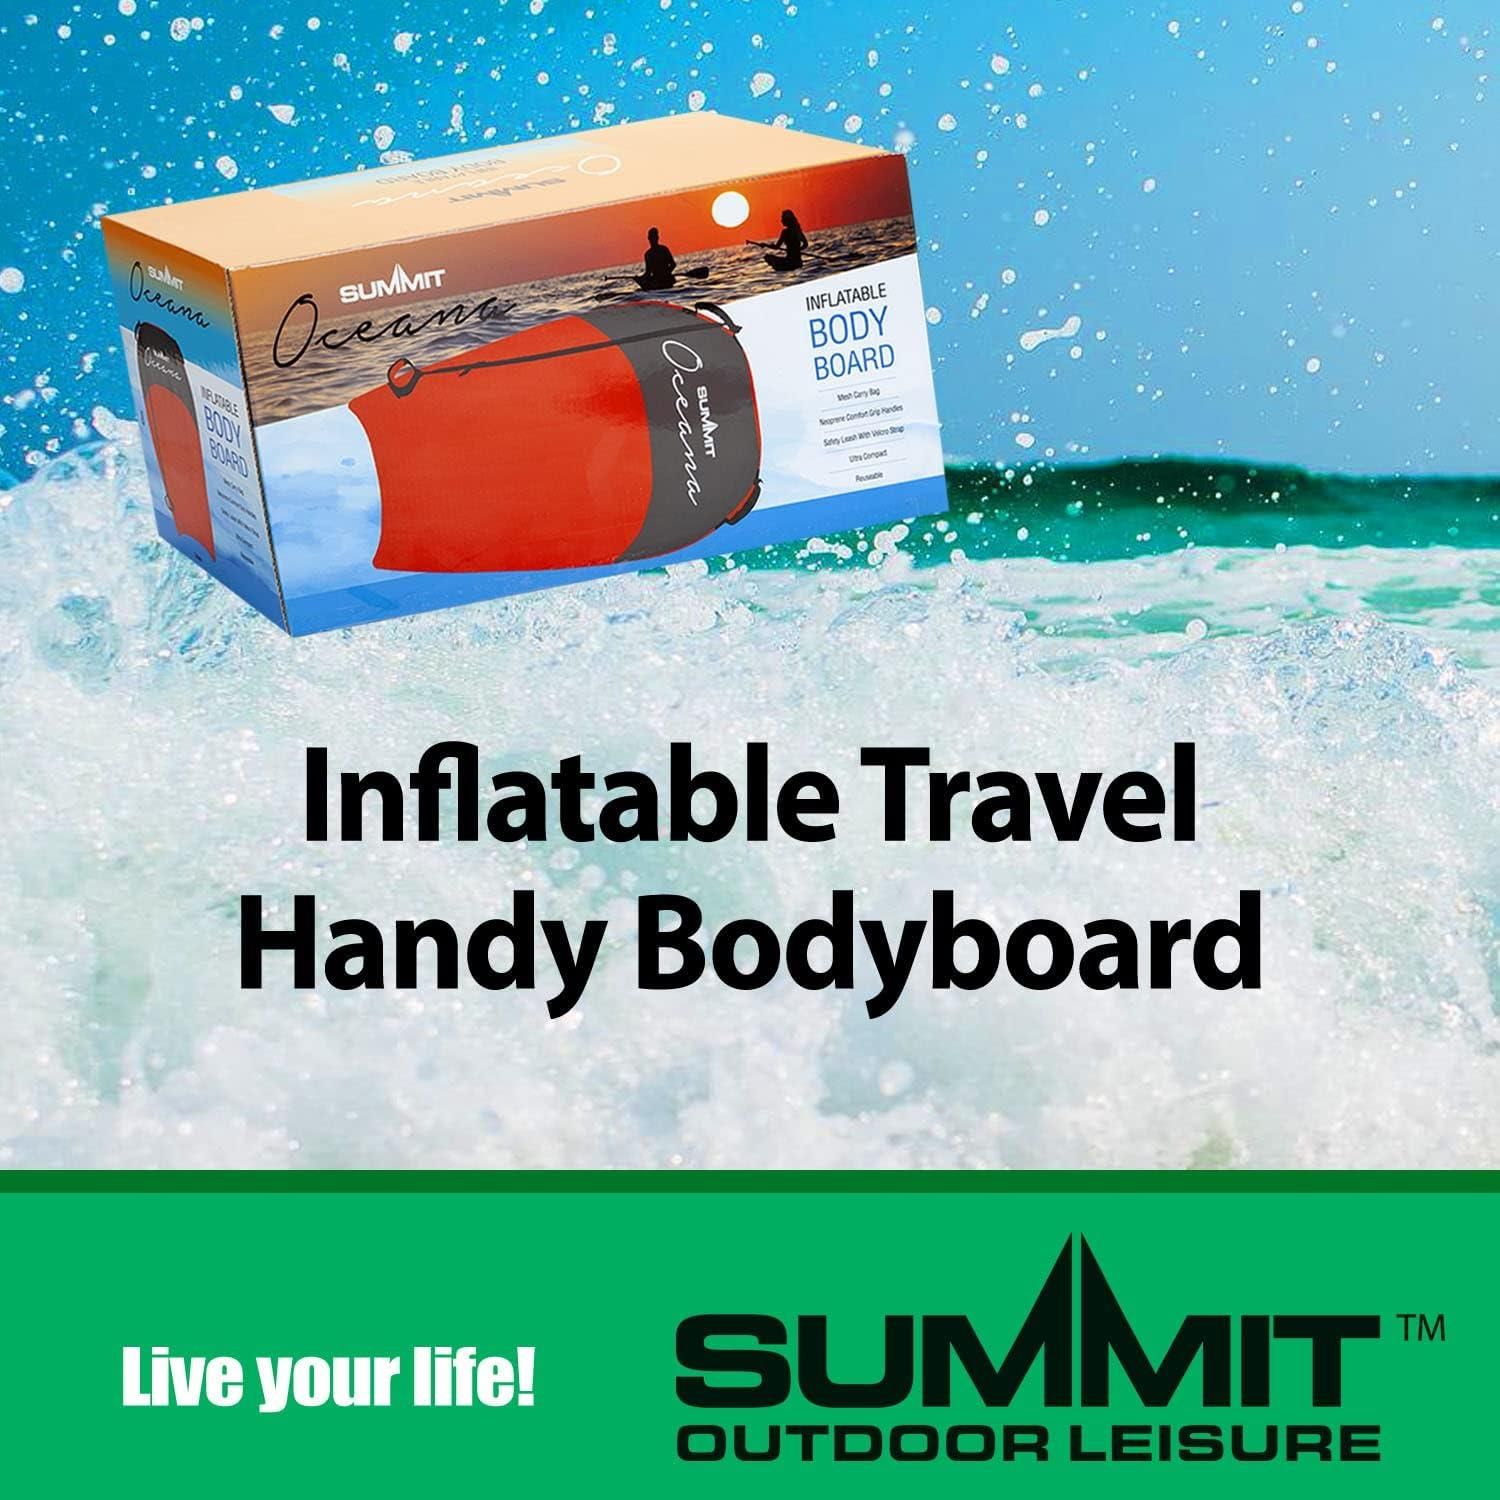 New Summit Oceana Single Inflatable Body Board Red